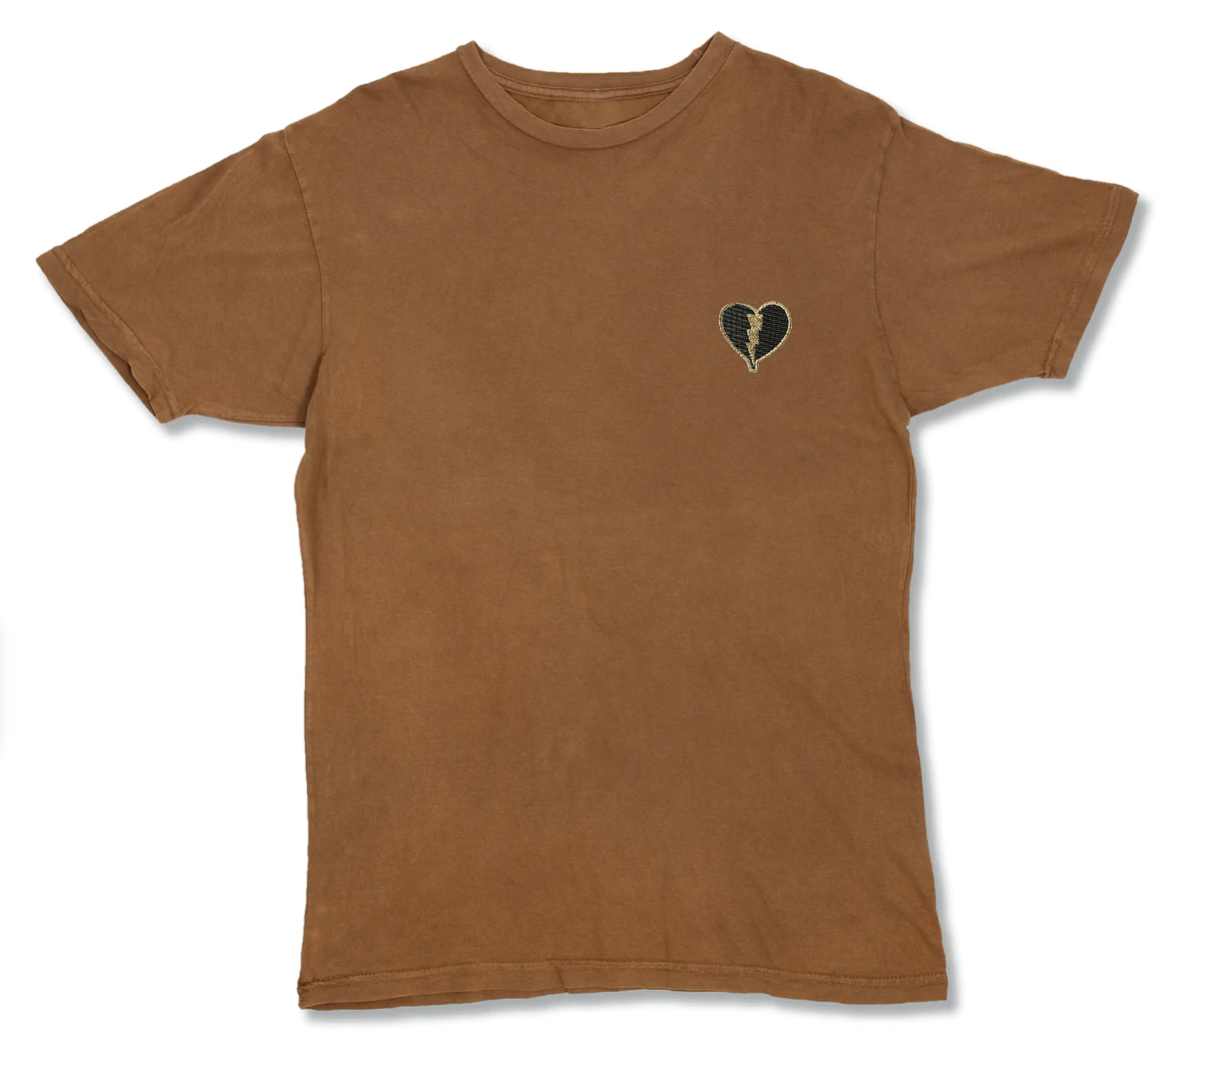 Gold Heart Clothing Vintage T-Shirt